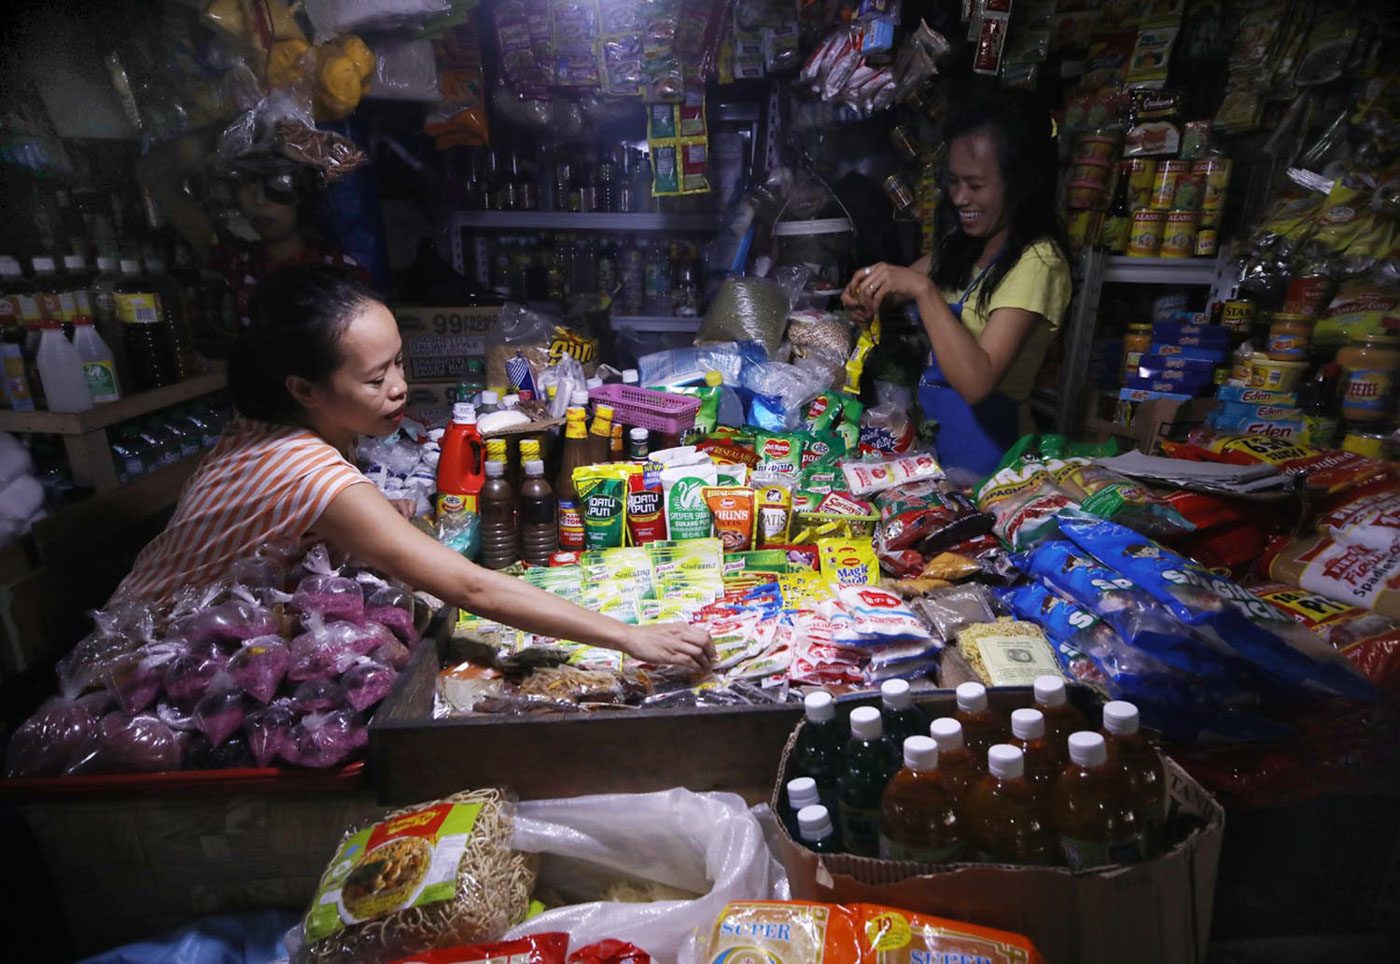 Inflation in September 2018 strains Filipinos’ budget at 6.7%